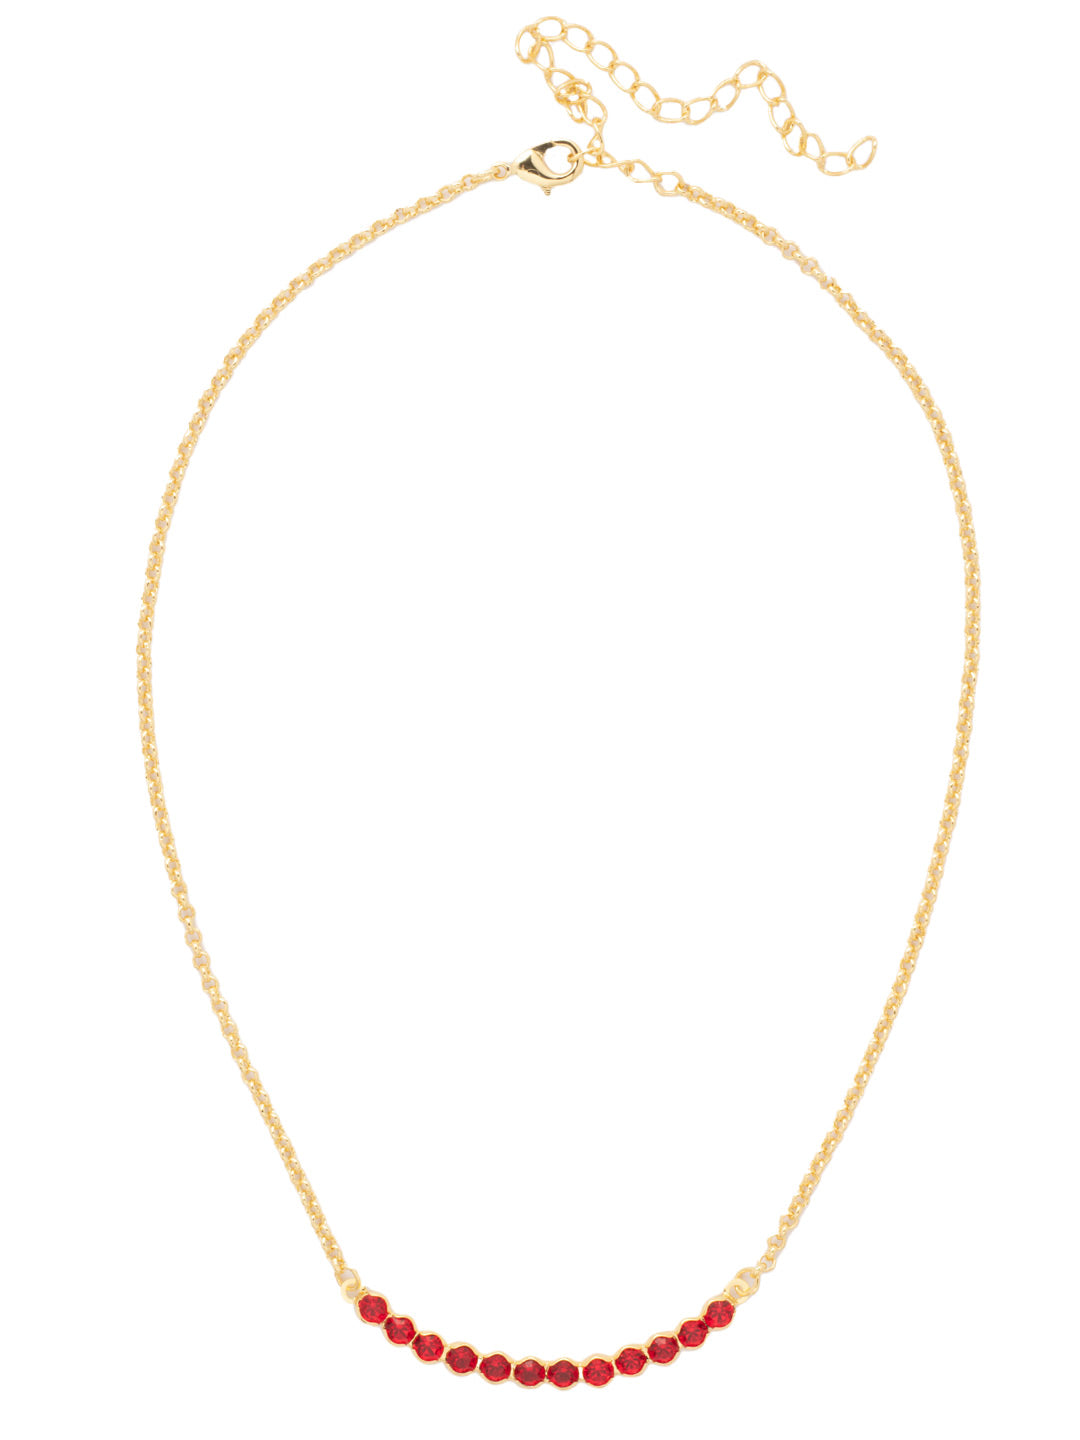 Amber Tennis Necklace - NFL8BGFIS - <p>The Amber Tennis Necklace features a line of round crystals on an adjustable chain, secured by a lobster claw clasp. From Sorrelli's Fireside collection in our Bright Gold-tone finish.</p>